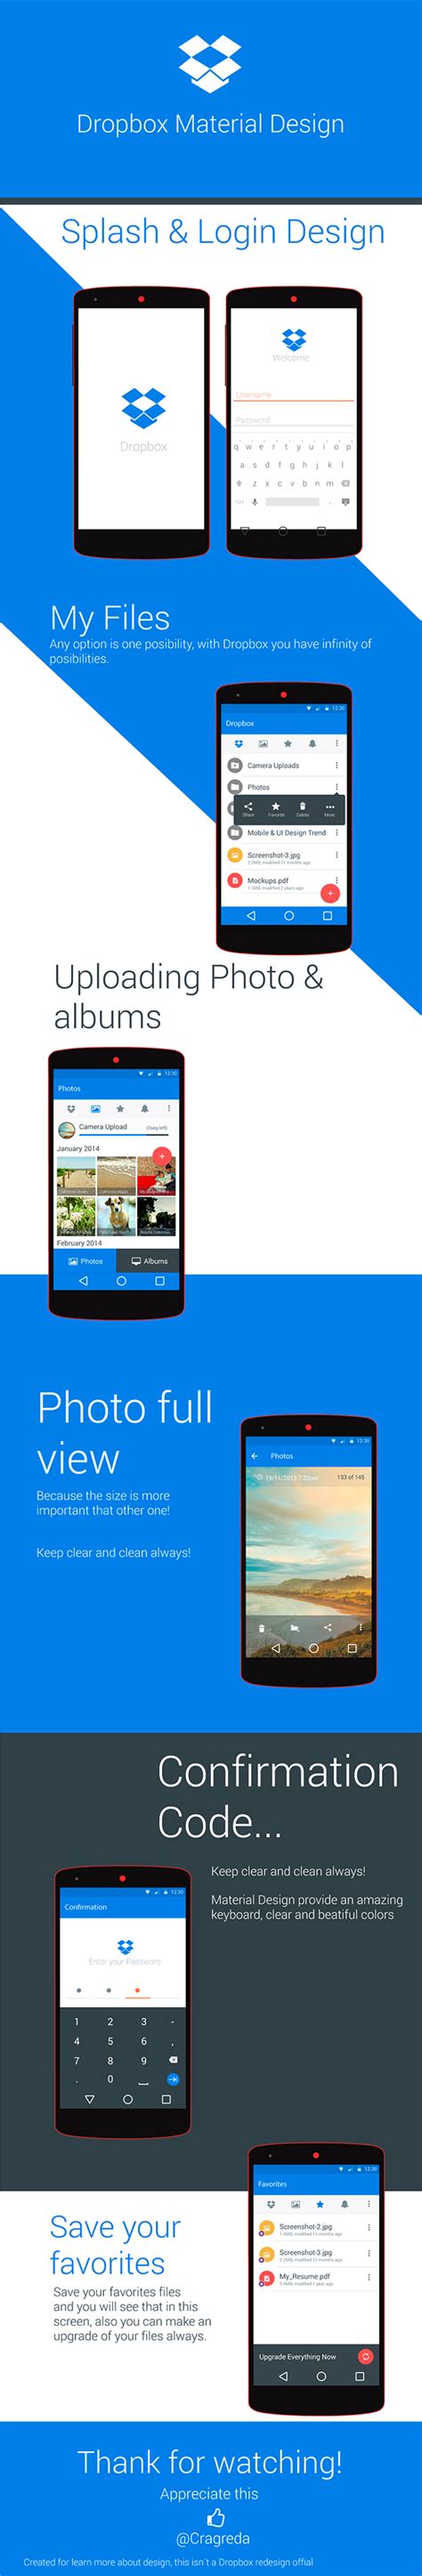 Dropbox Material Design 2014 on Behance | Android material design, Material design, Google ...